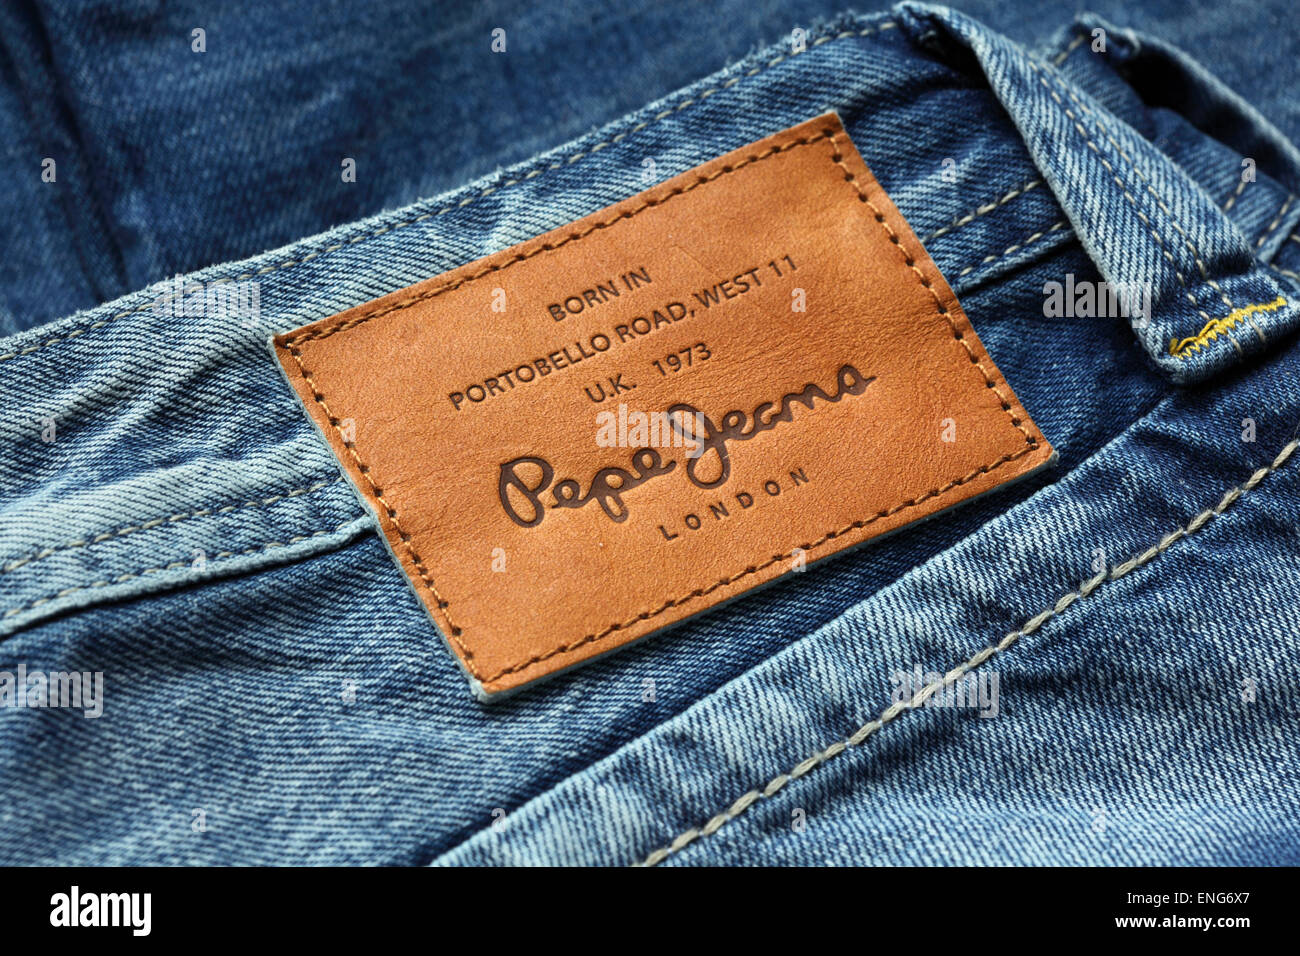 Denim Patch High Resolution Stock Photography and Images - Alamy